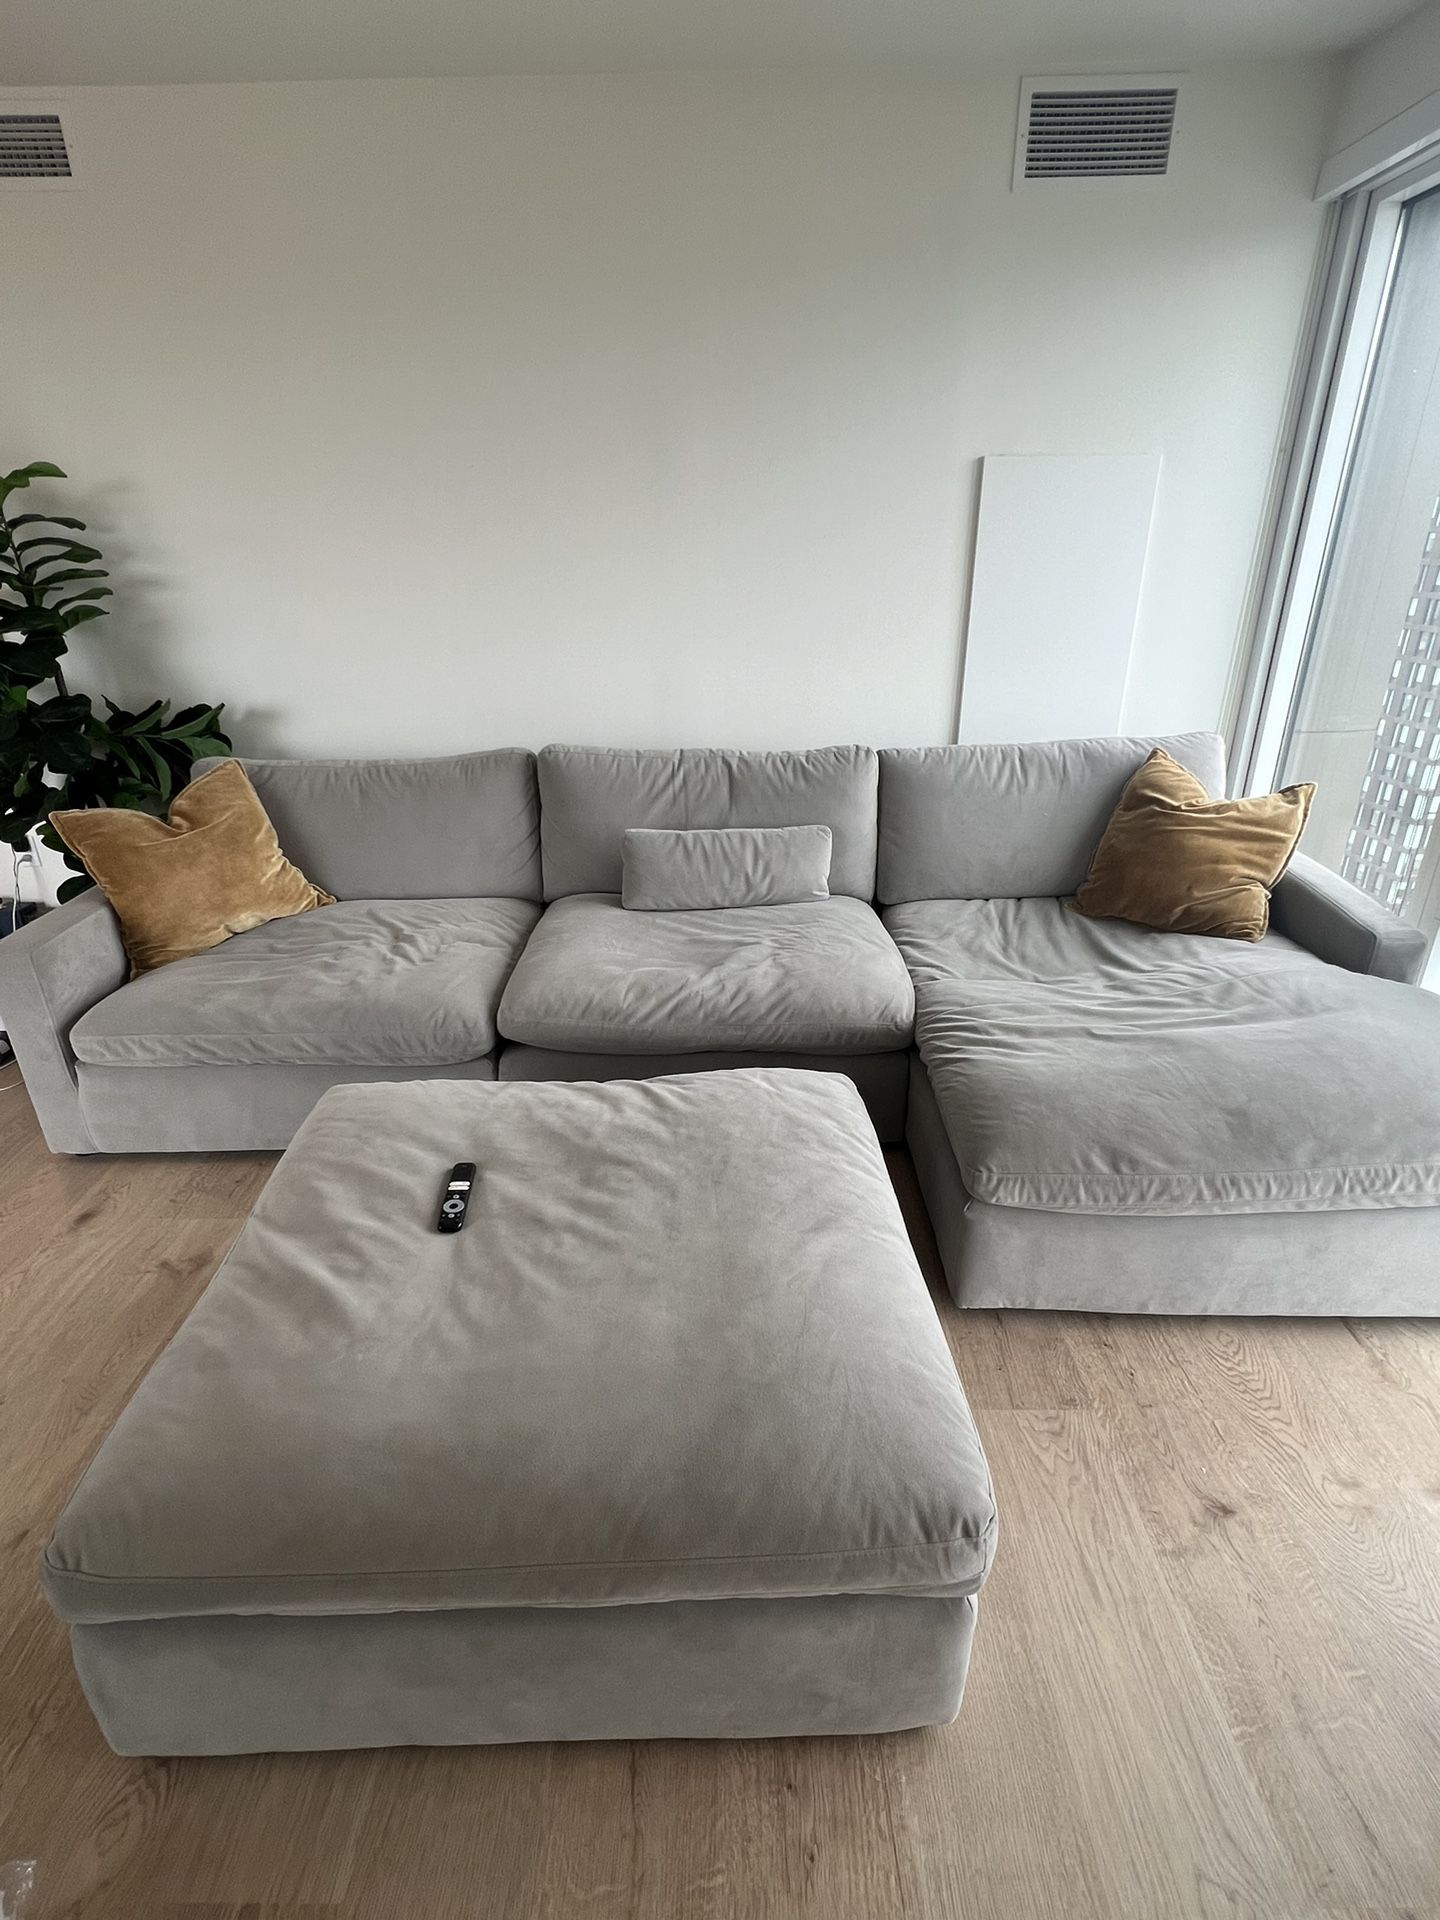 NEW Cozy Sectional Couch